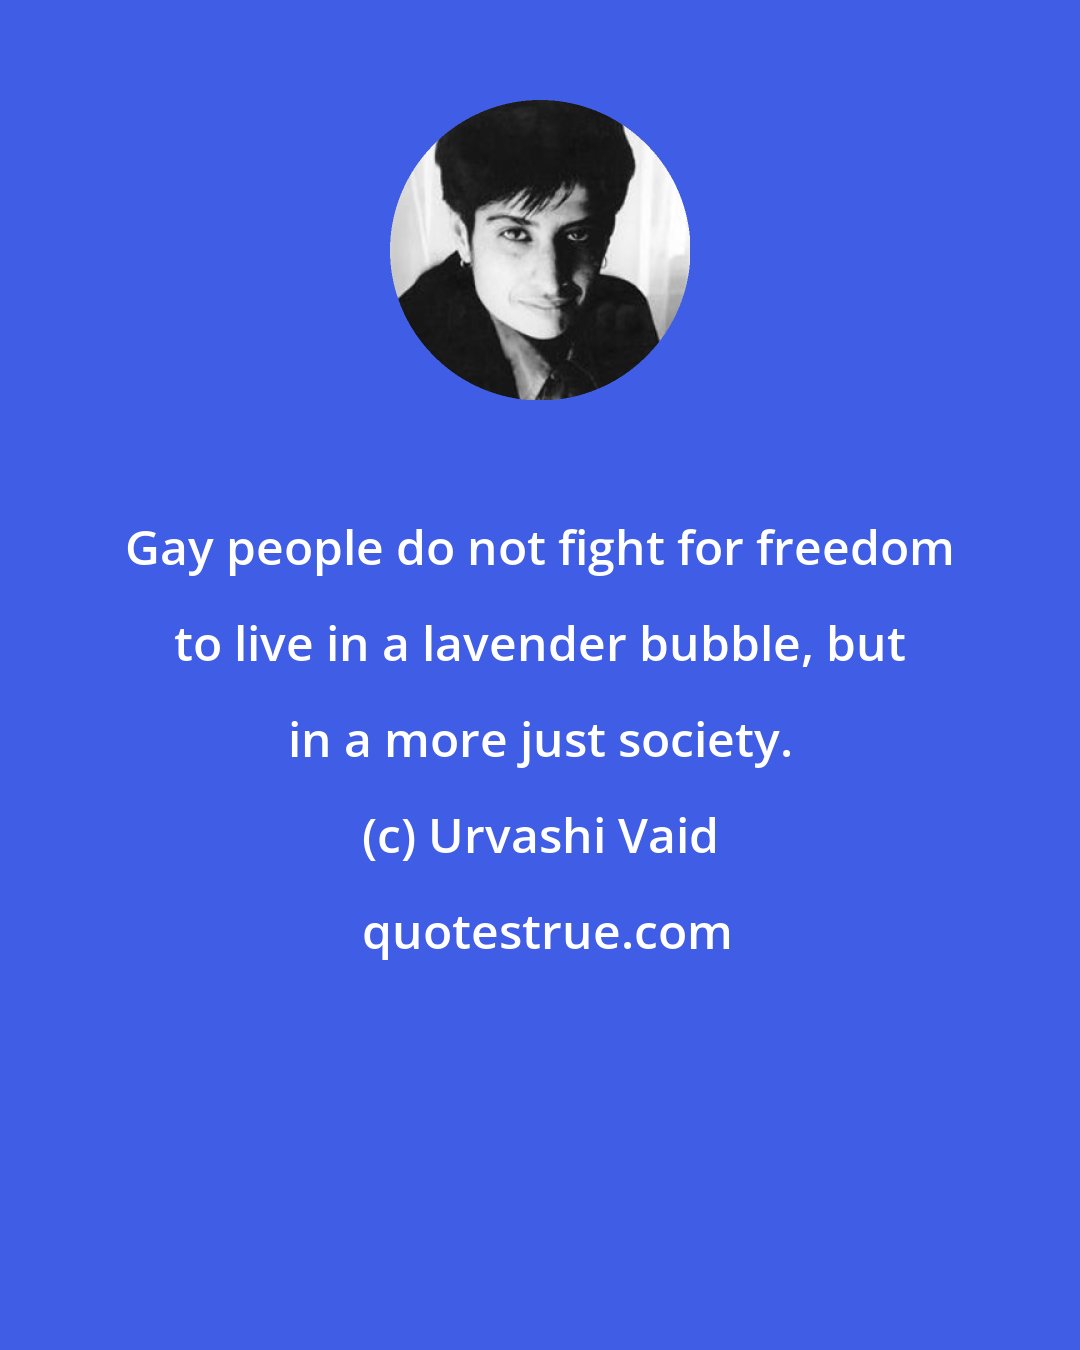 Urvashi Vaid: Gay people do not fight for freedom to live in a lavender bubble, but in a more just society.